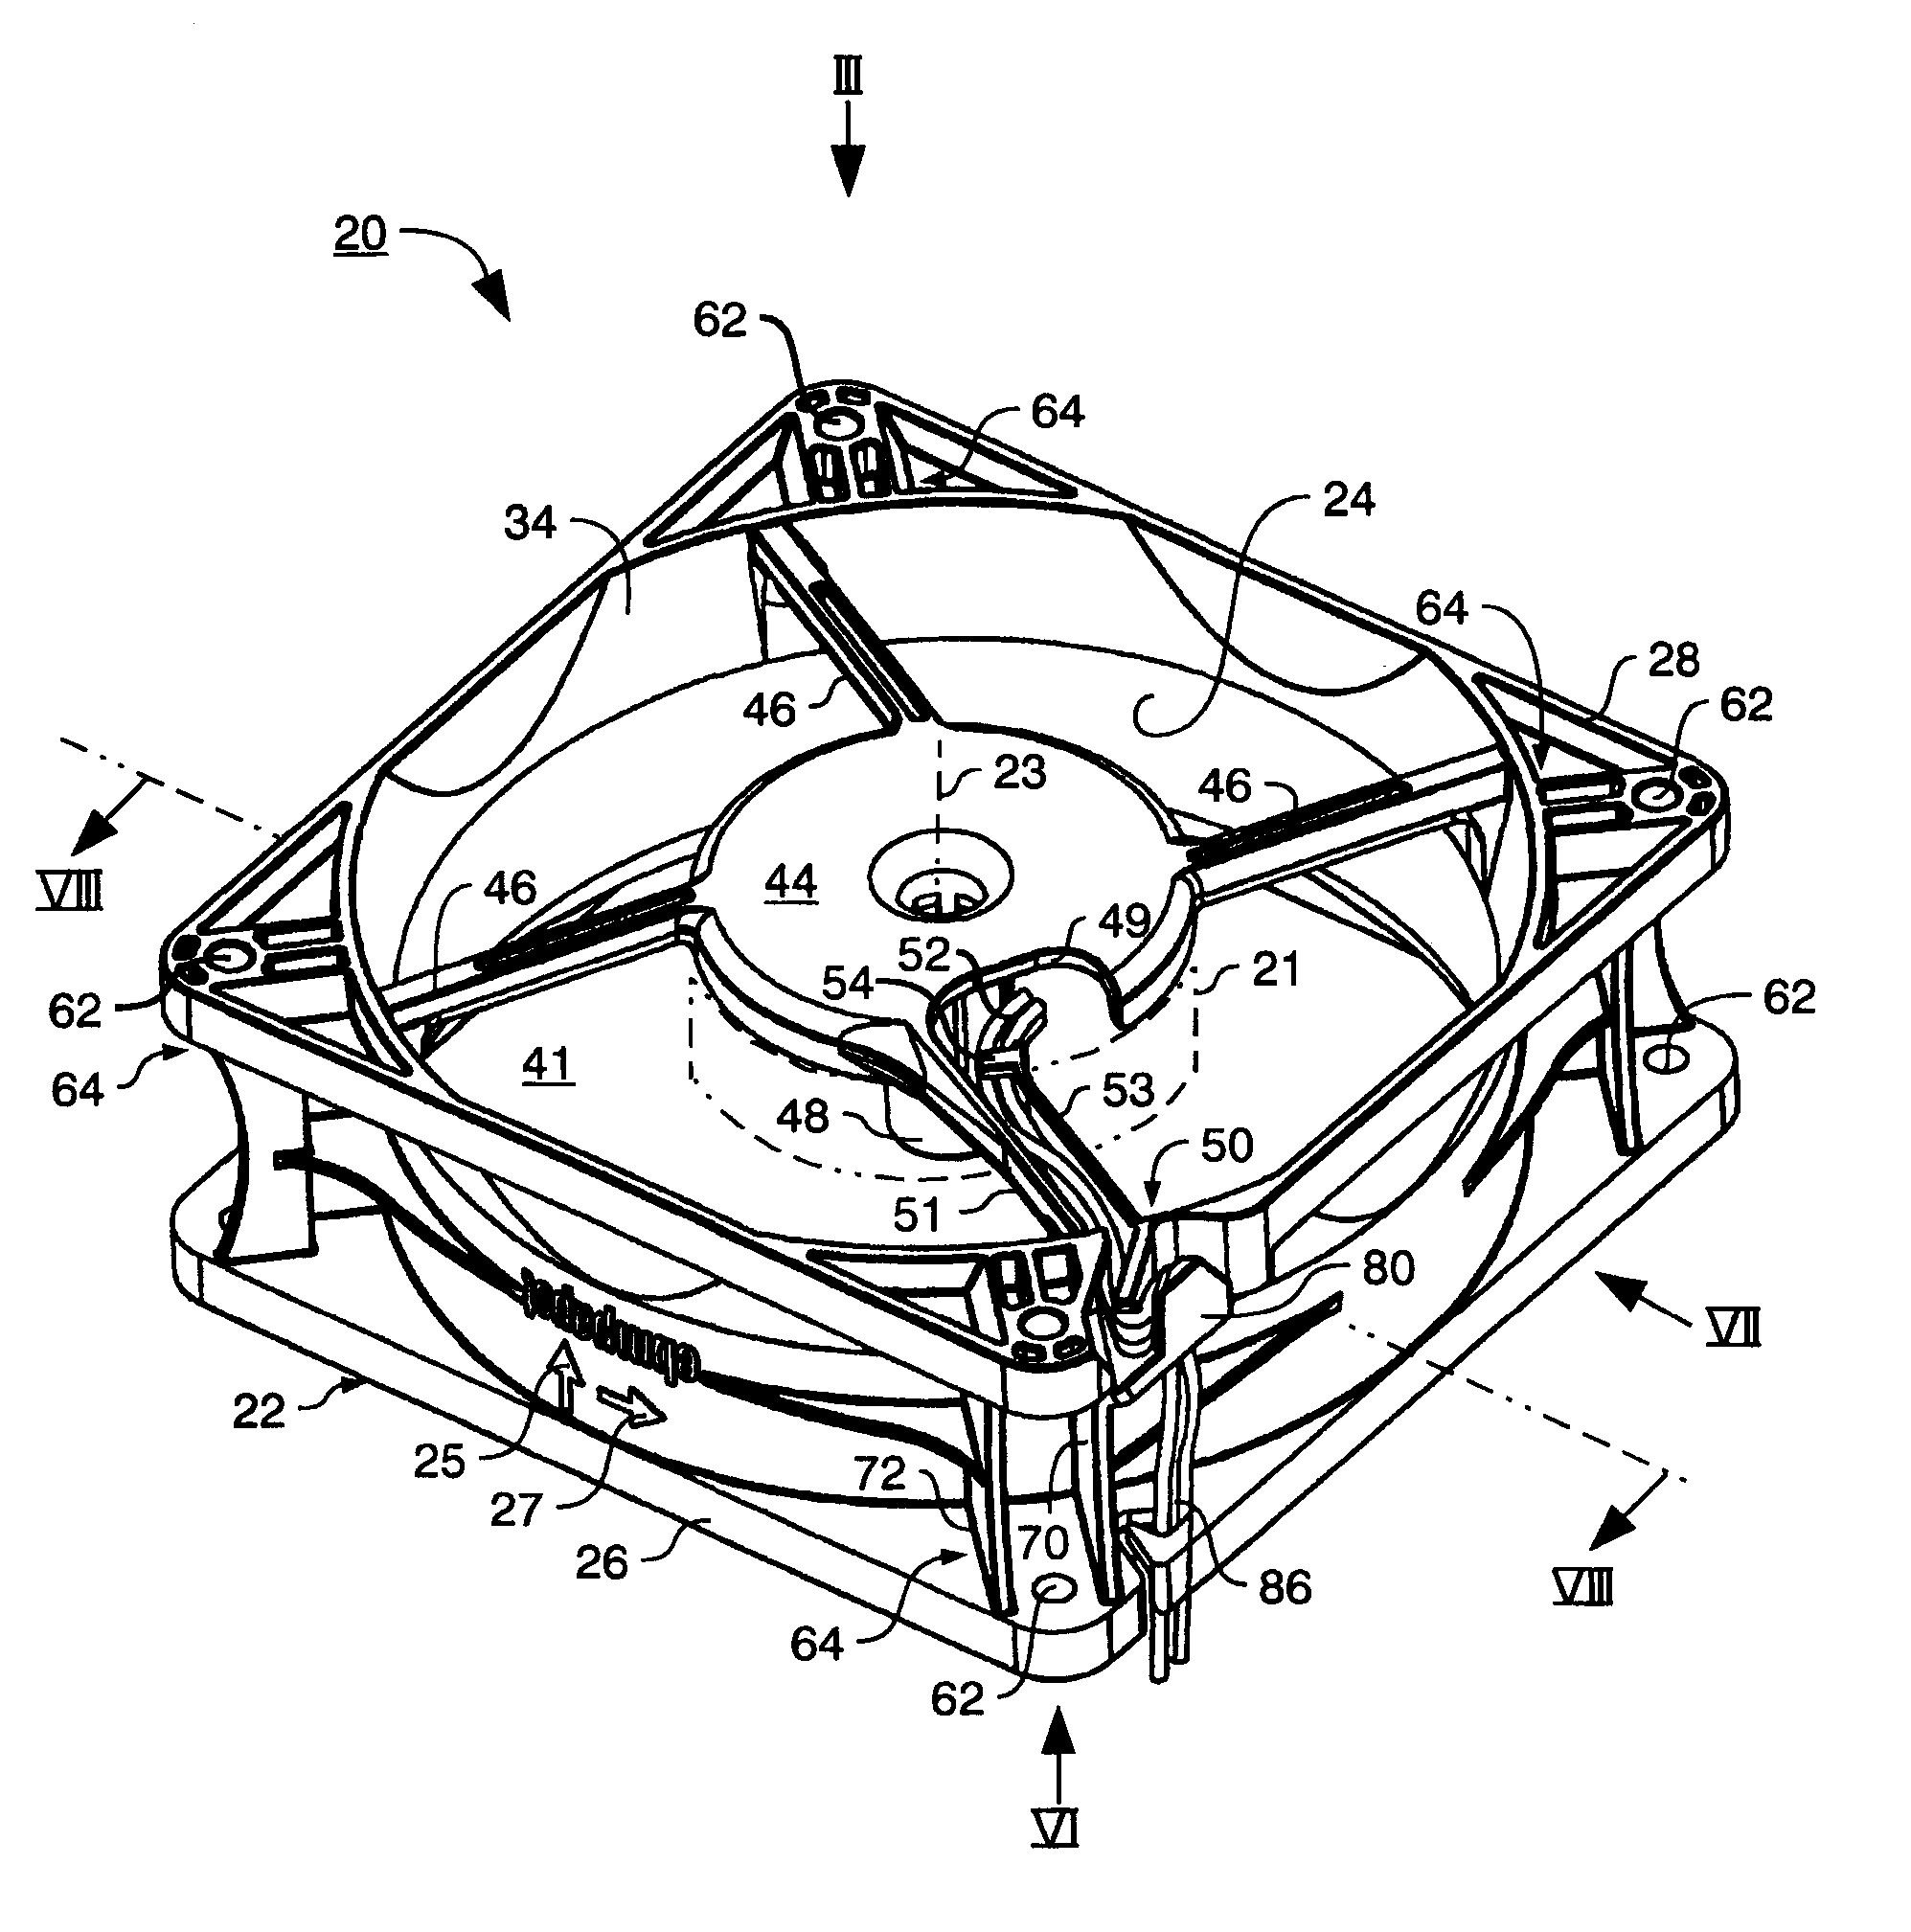 Fan housing with strain relief